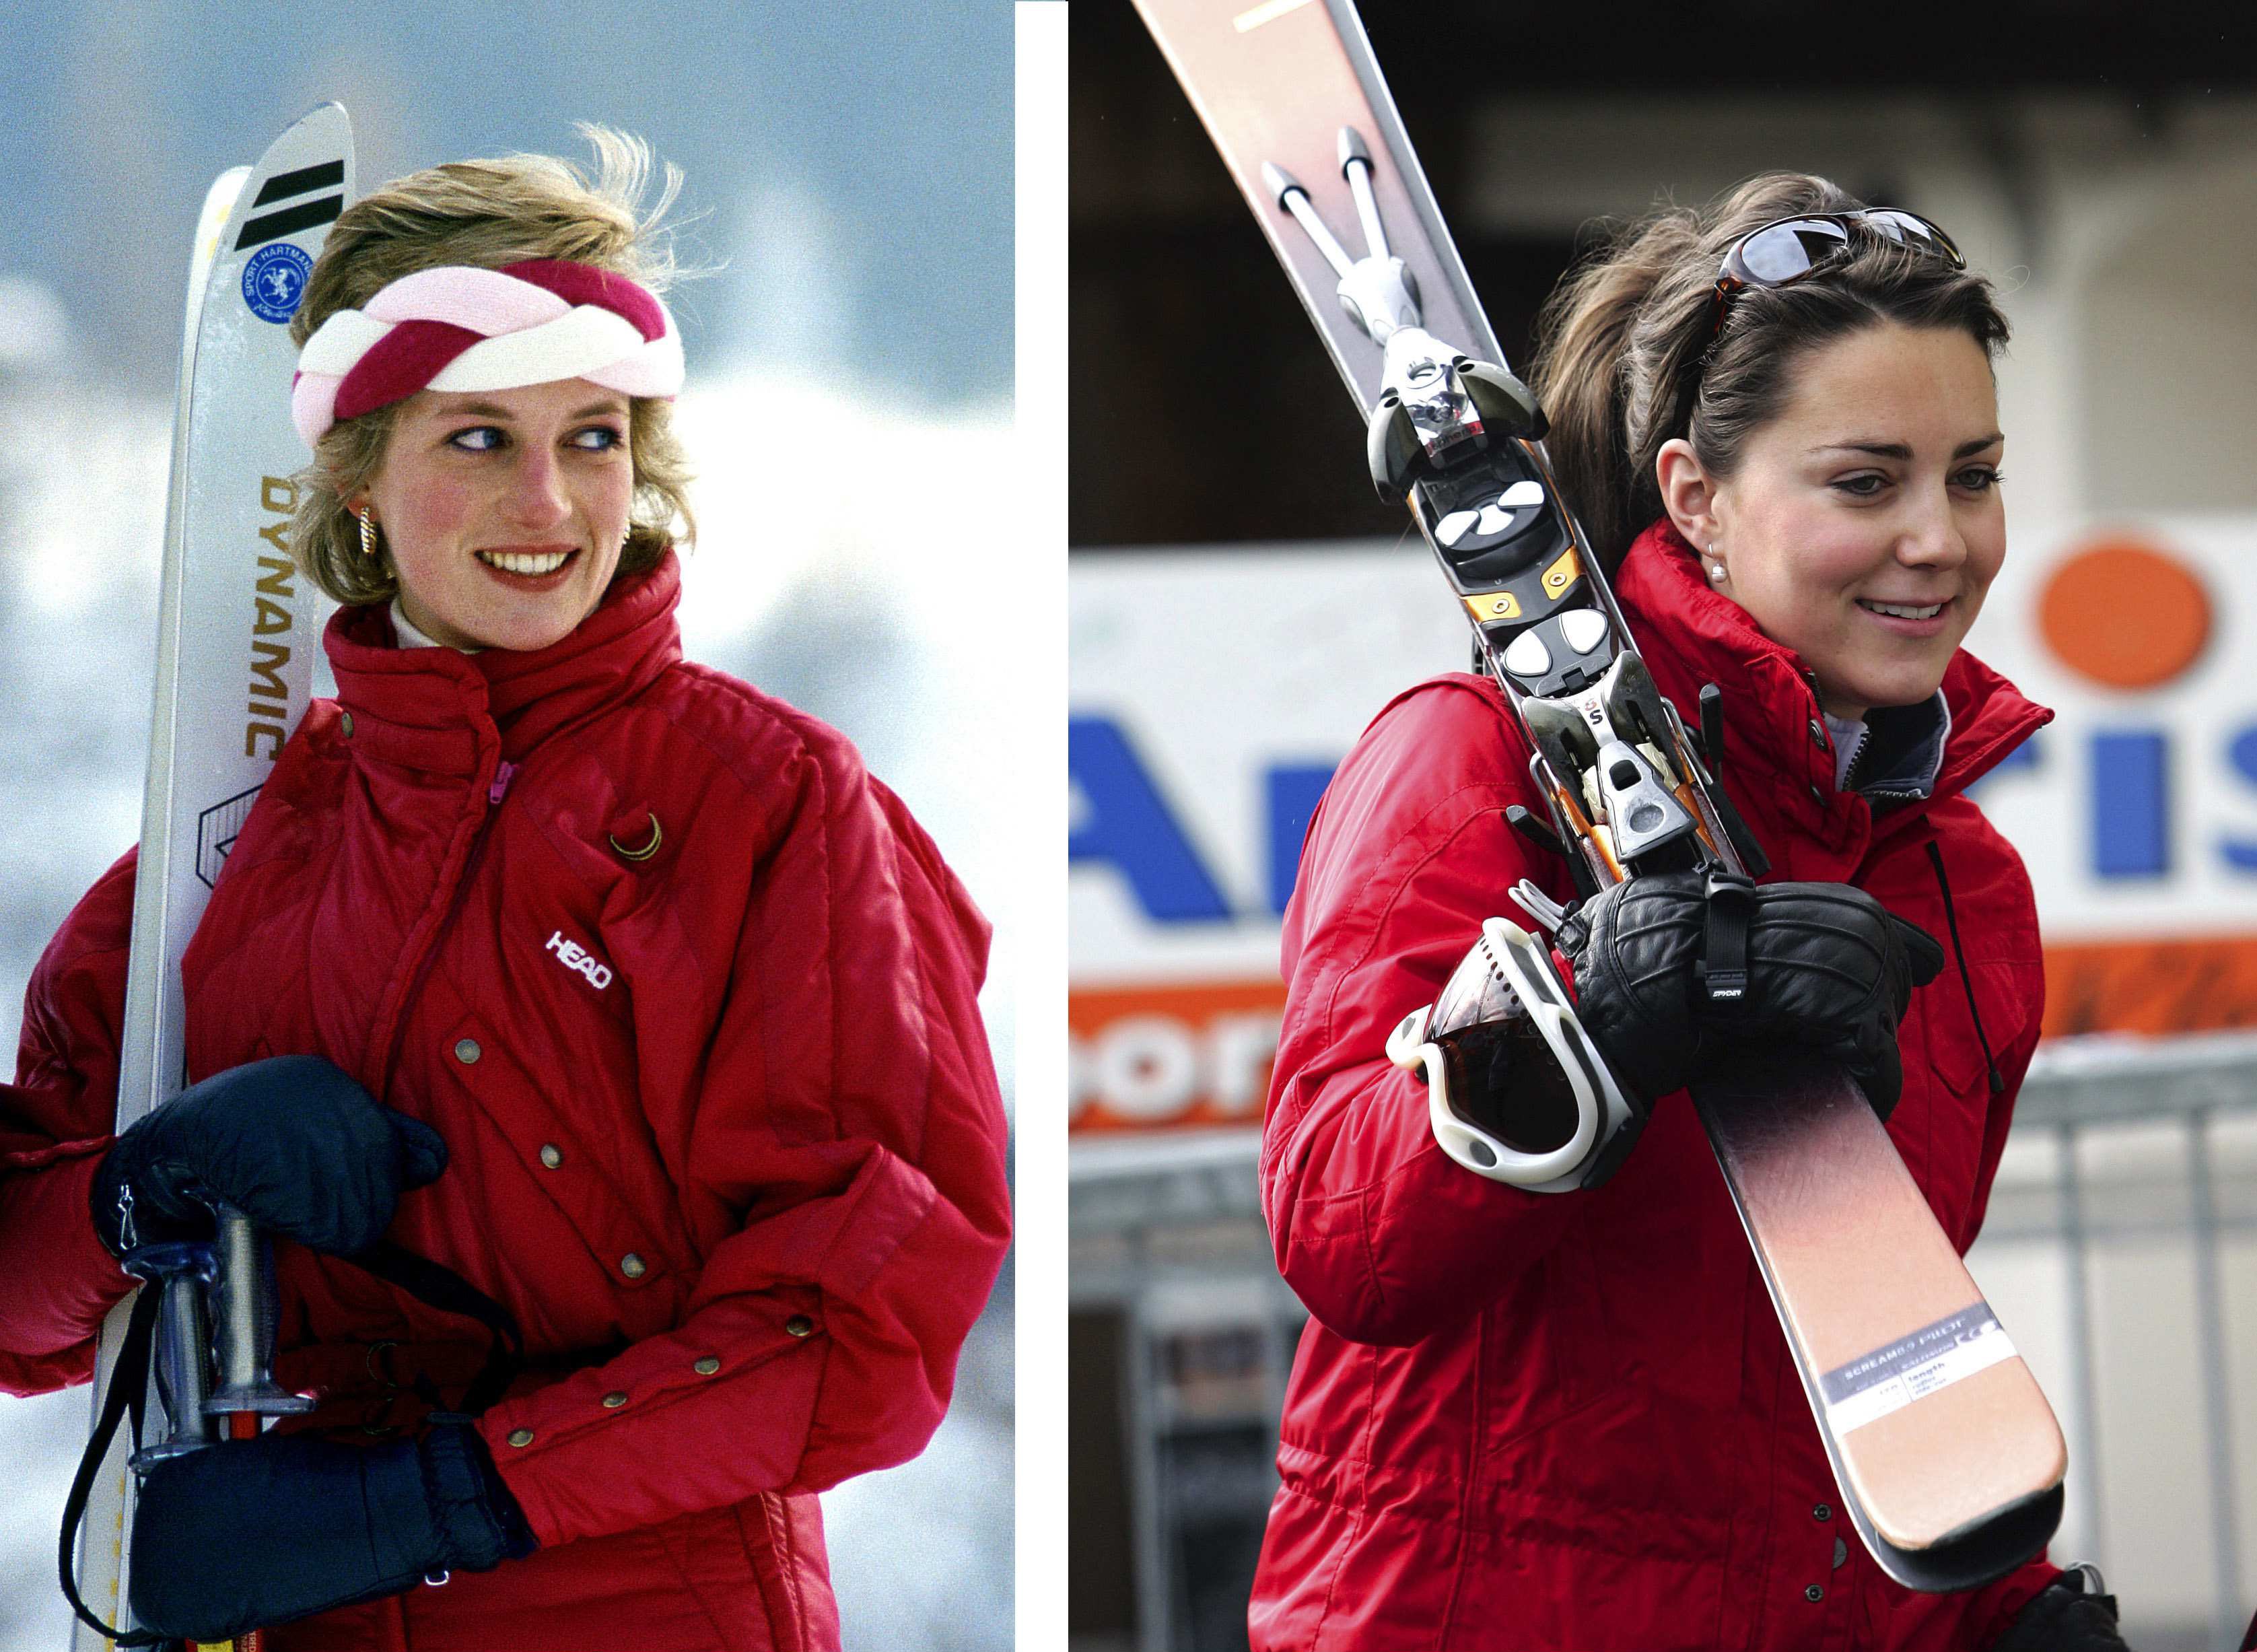 Princess Dianain Klosters on March 30, 2005 .[Left] Kate Middleton on January 9, 2008 [Right] | Source: Getty Images